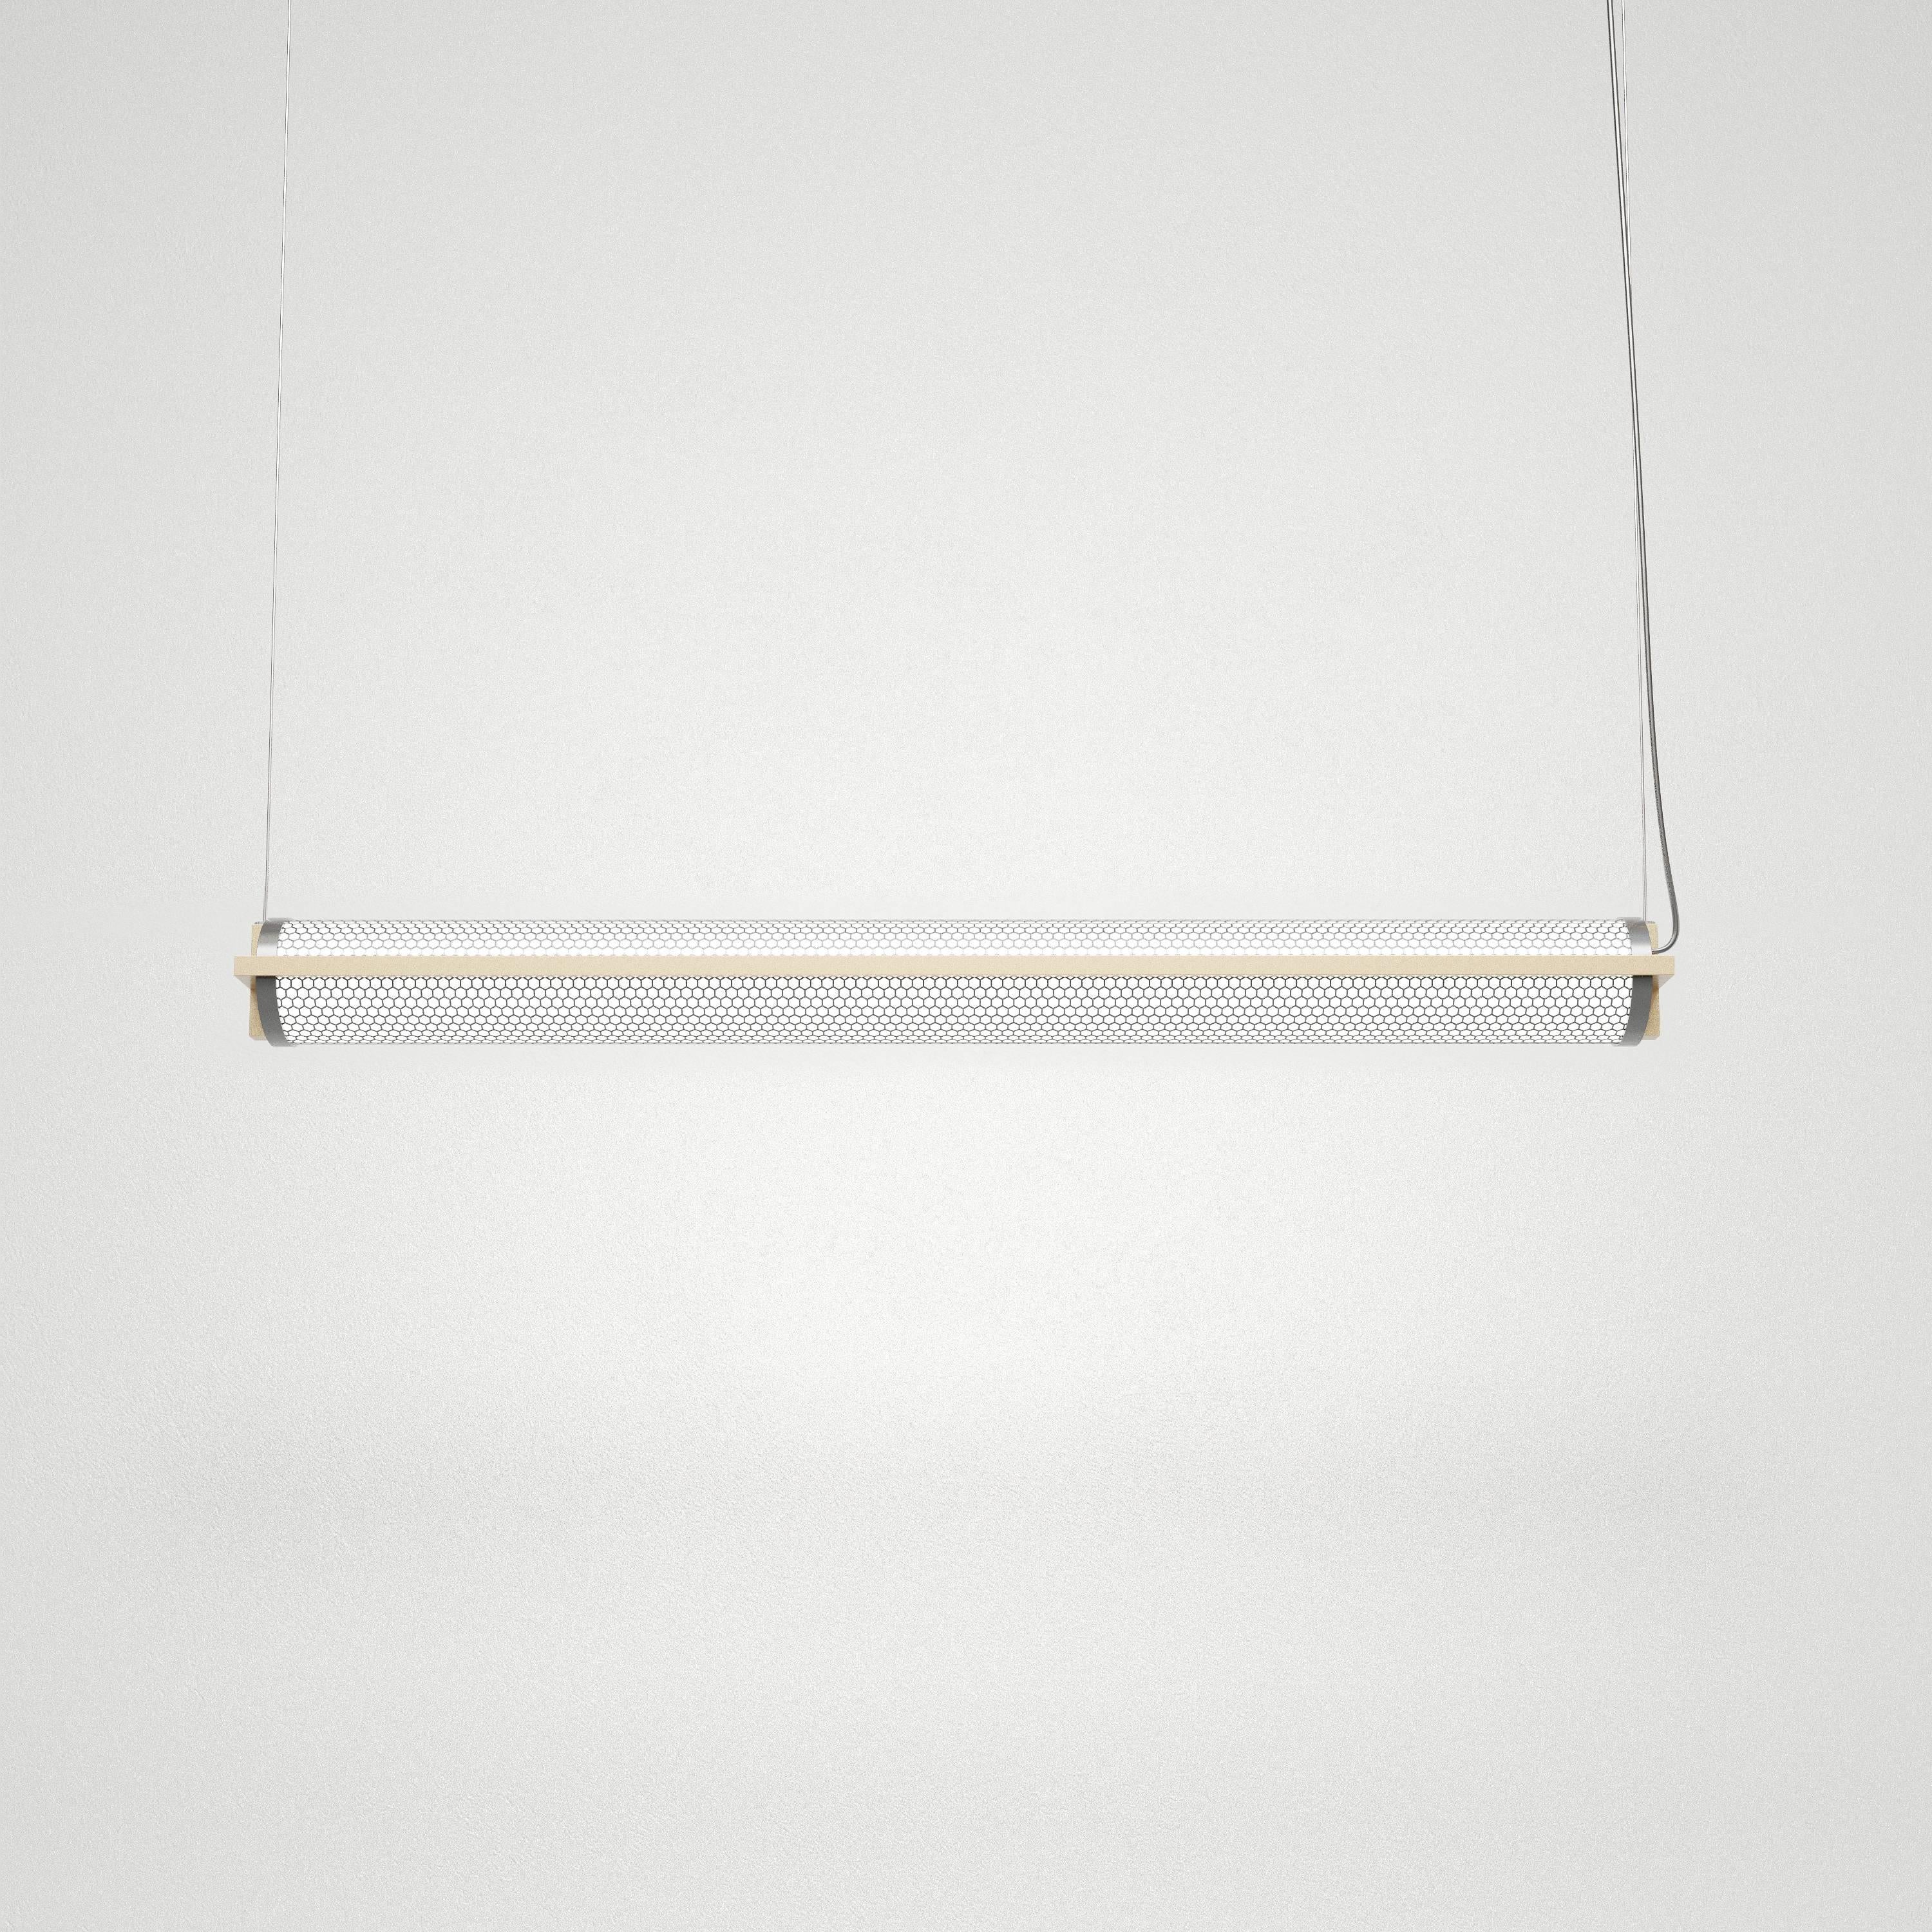 A collaboration between Juniper Design studio and designer David Meckley, Metropolis has grown from custom lighting solution into a full residential and architectural lighting collection. Metropolis, in its simplest form, is a medley of suspended,